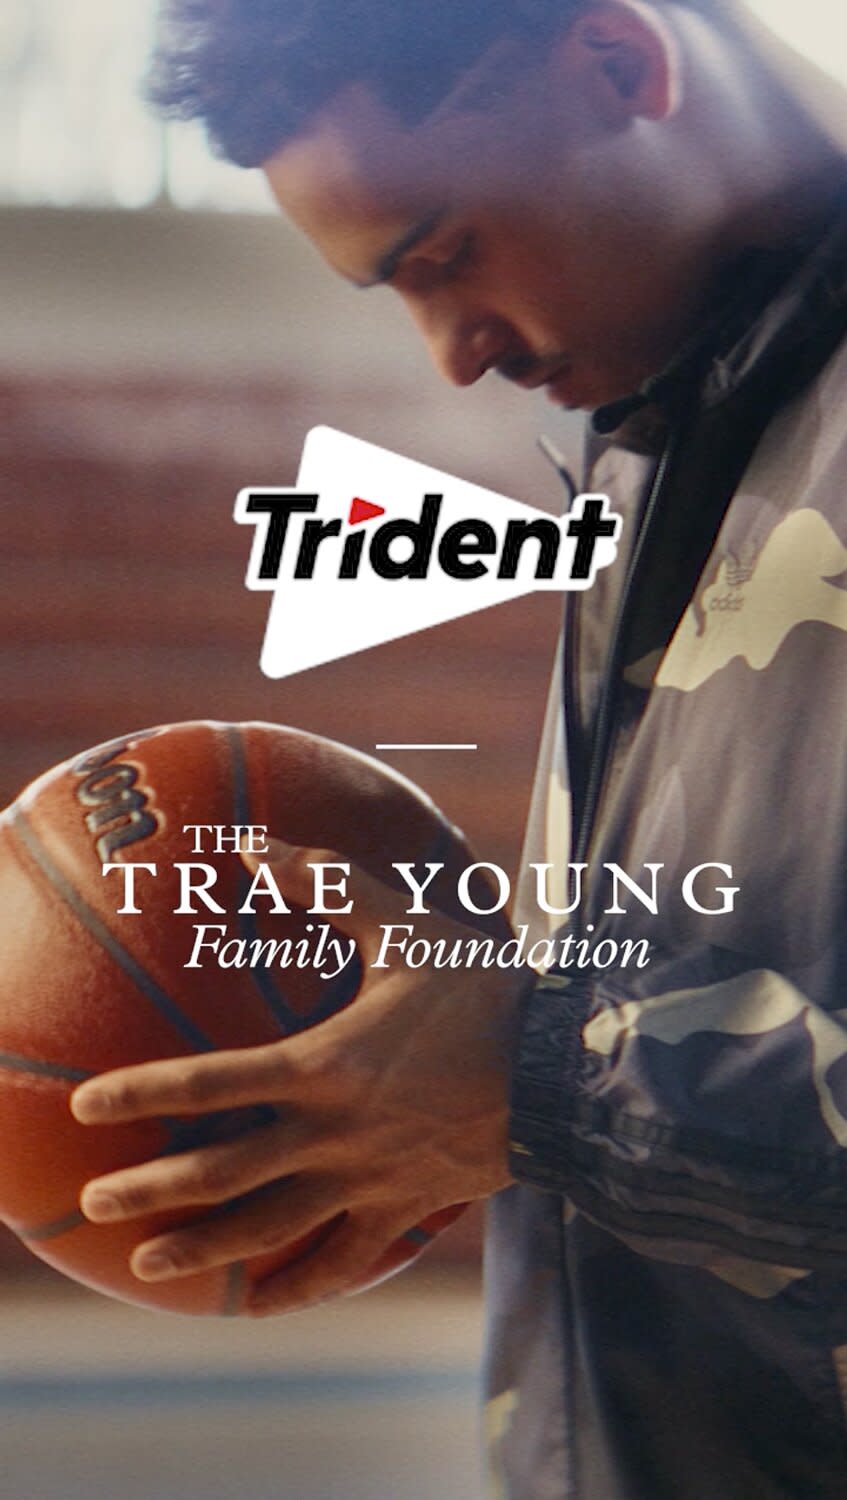 Trident donating 200K to Trae Young opening an athletic center in Oklahoma